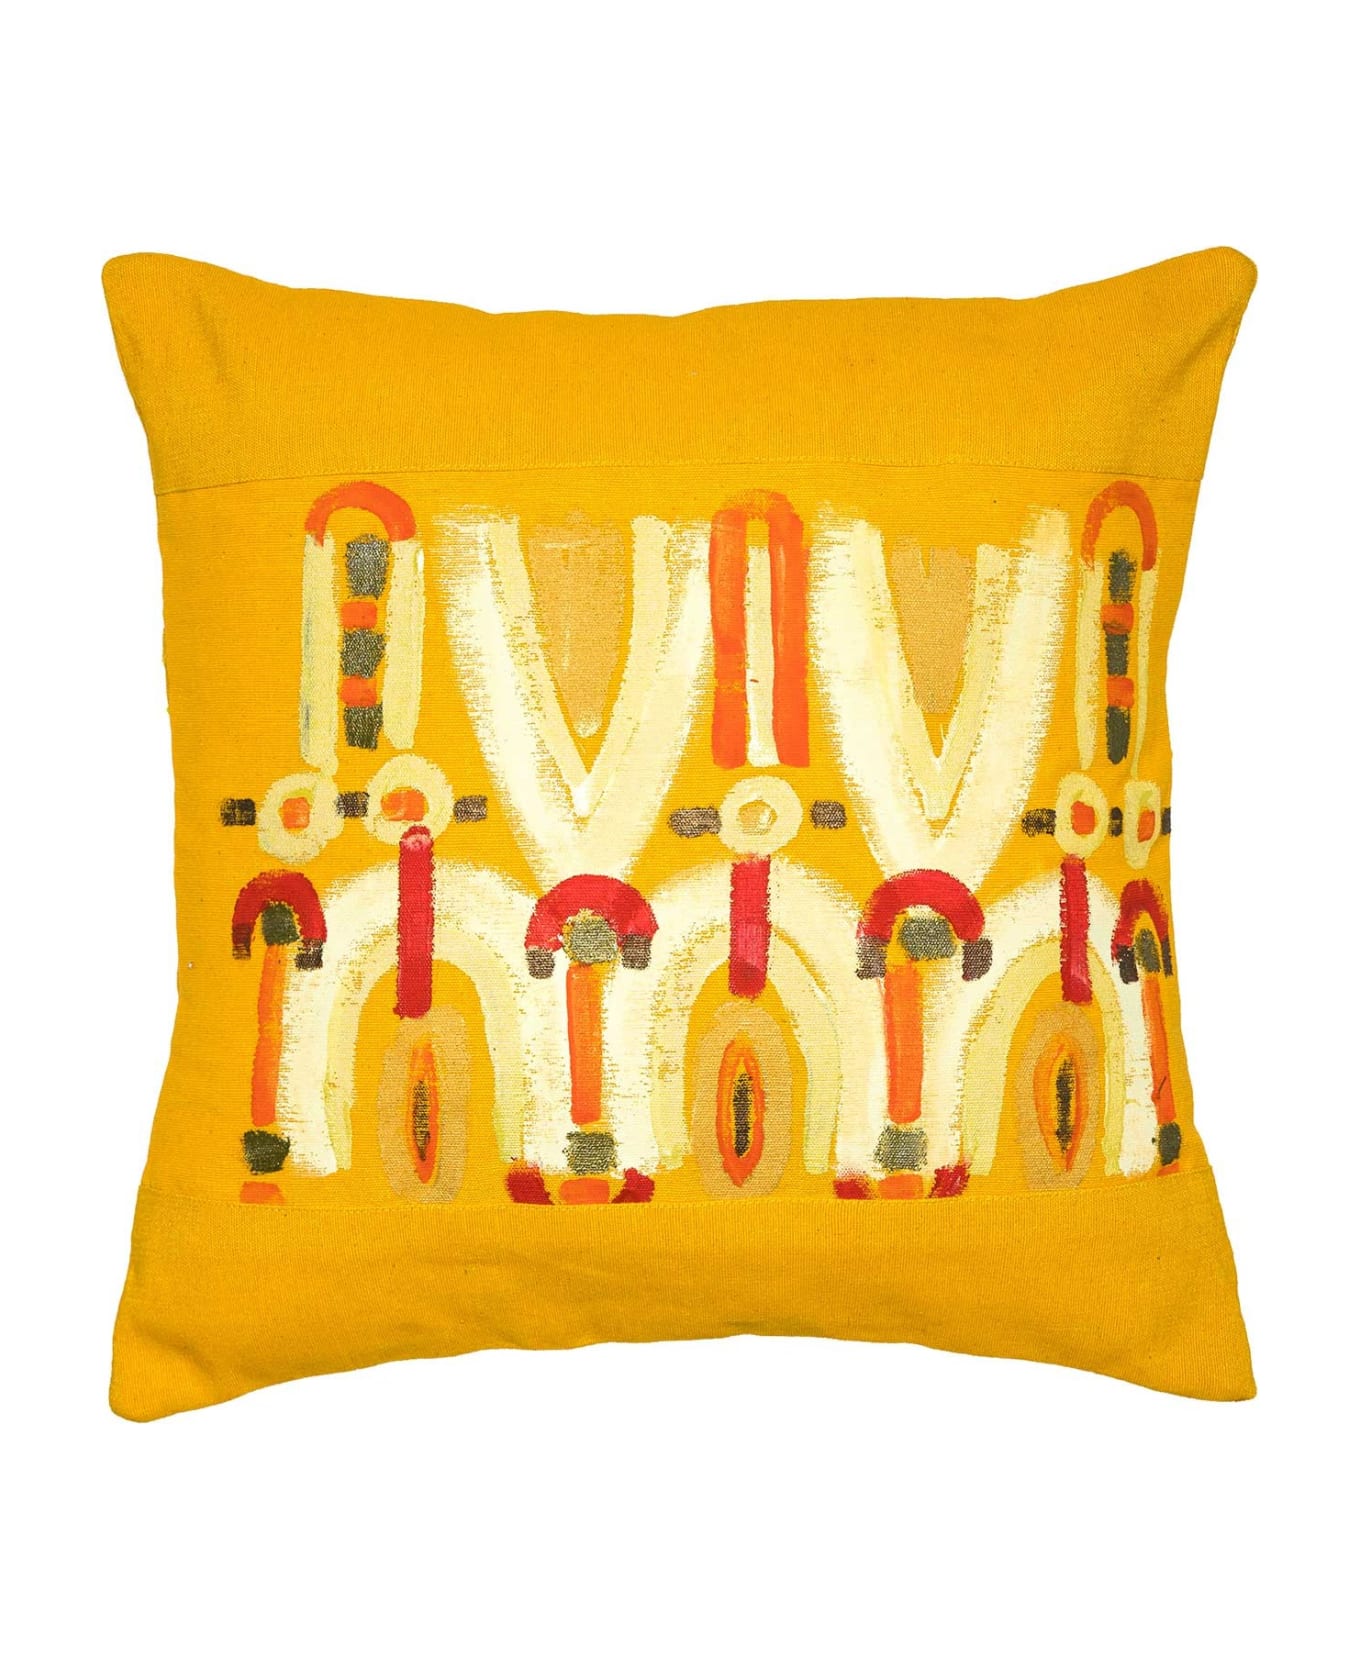 Le Botteghe su Gologone Cotton Hand Painted Indoor Cushion 80x80 cm - Yellow Fantasy